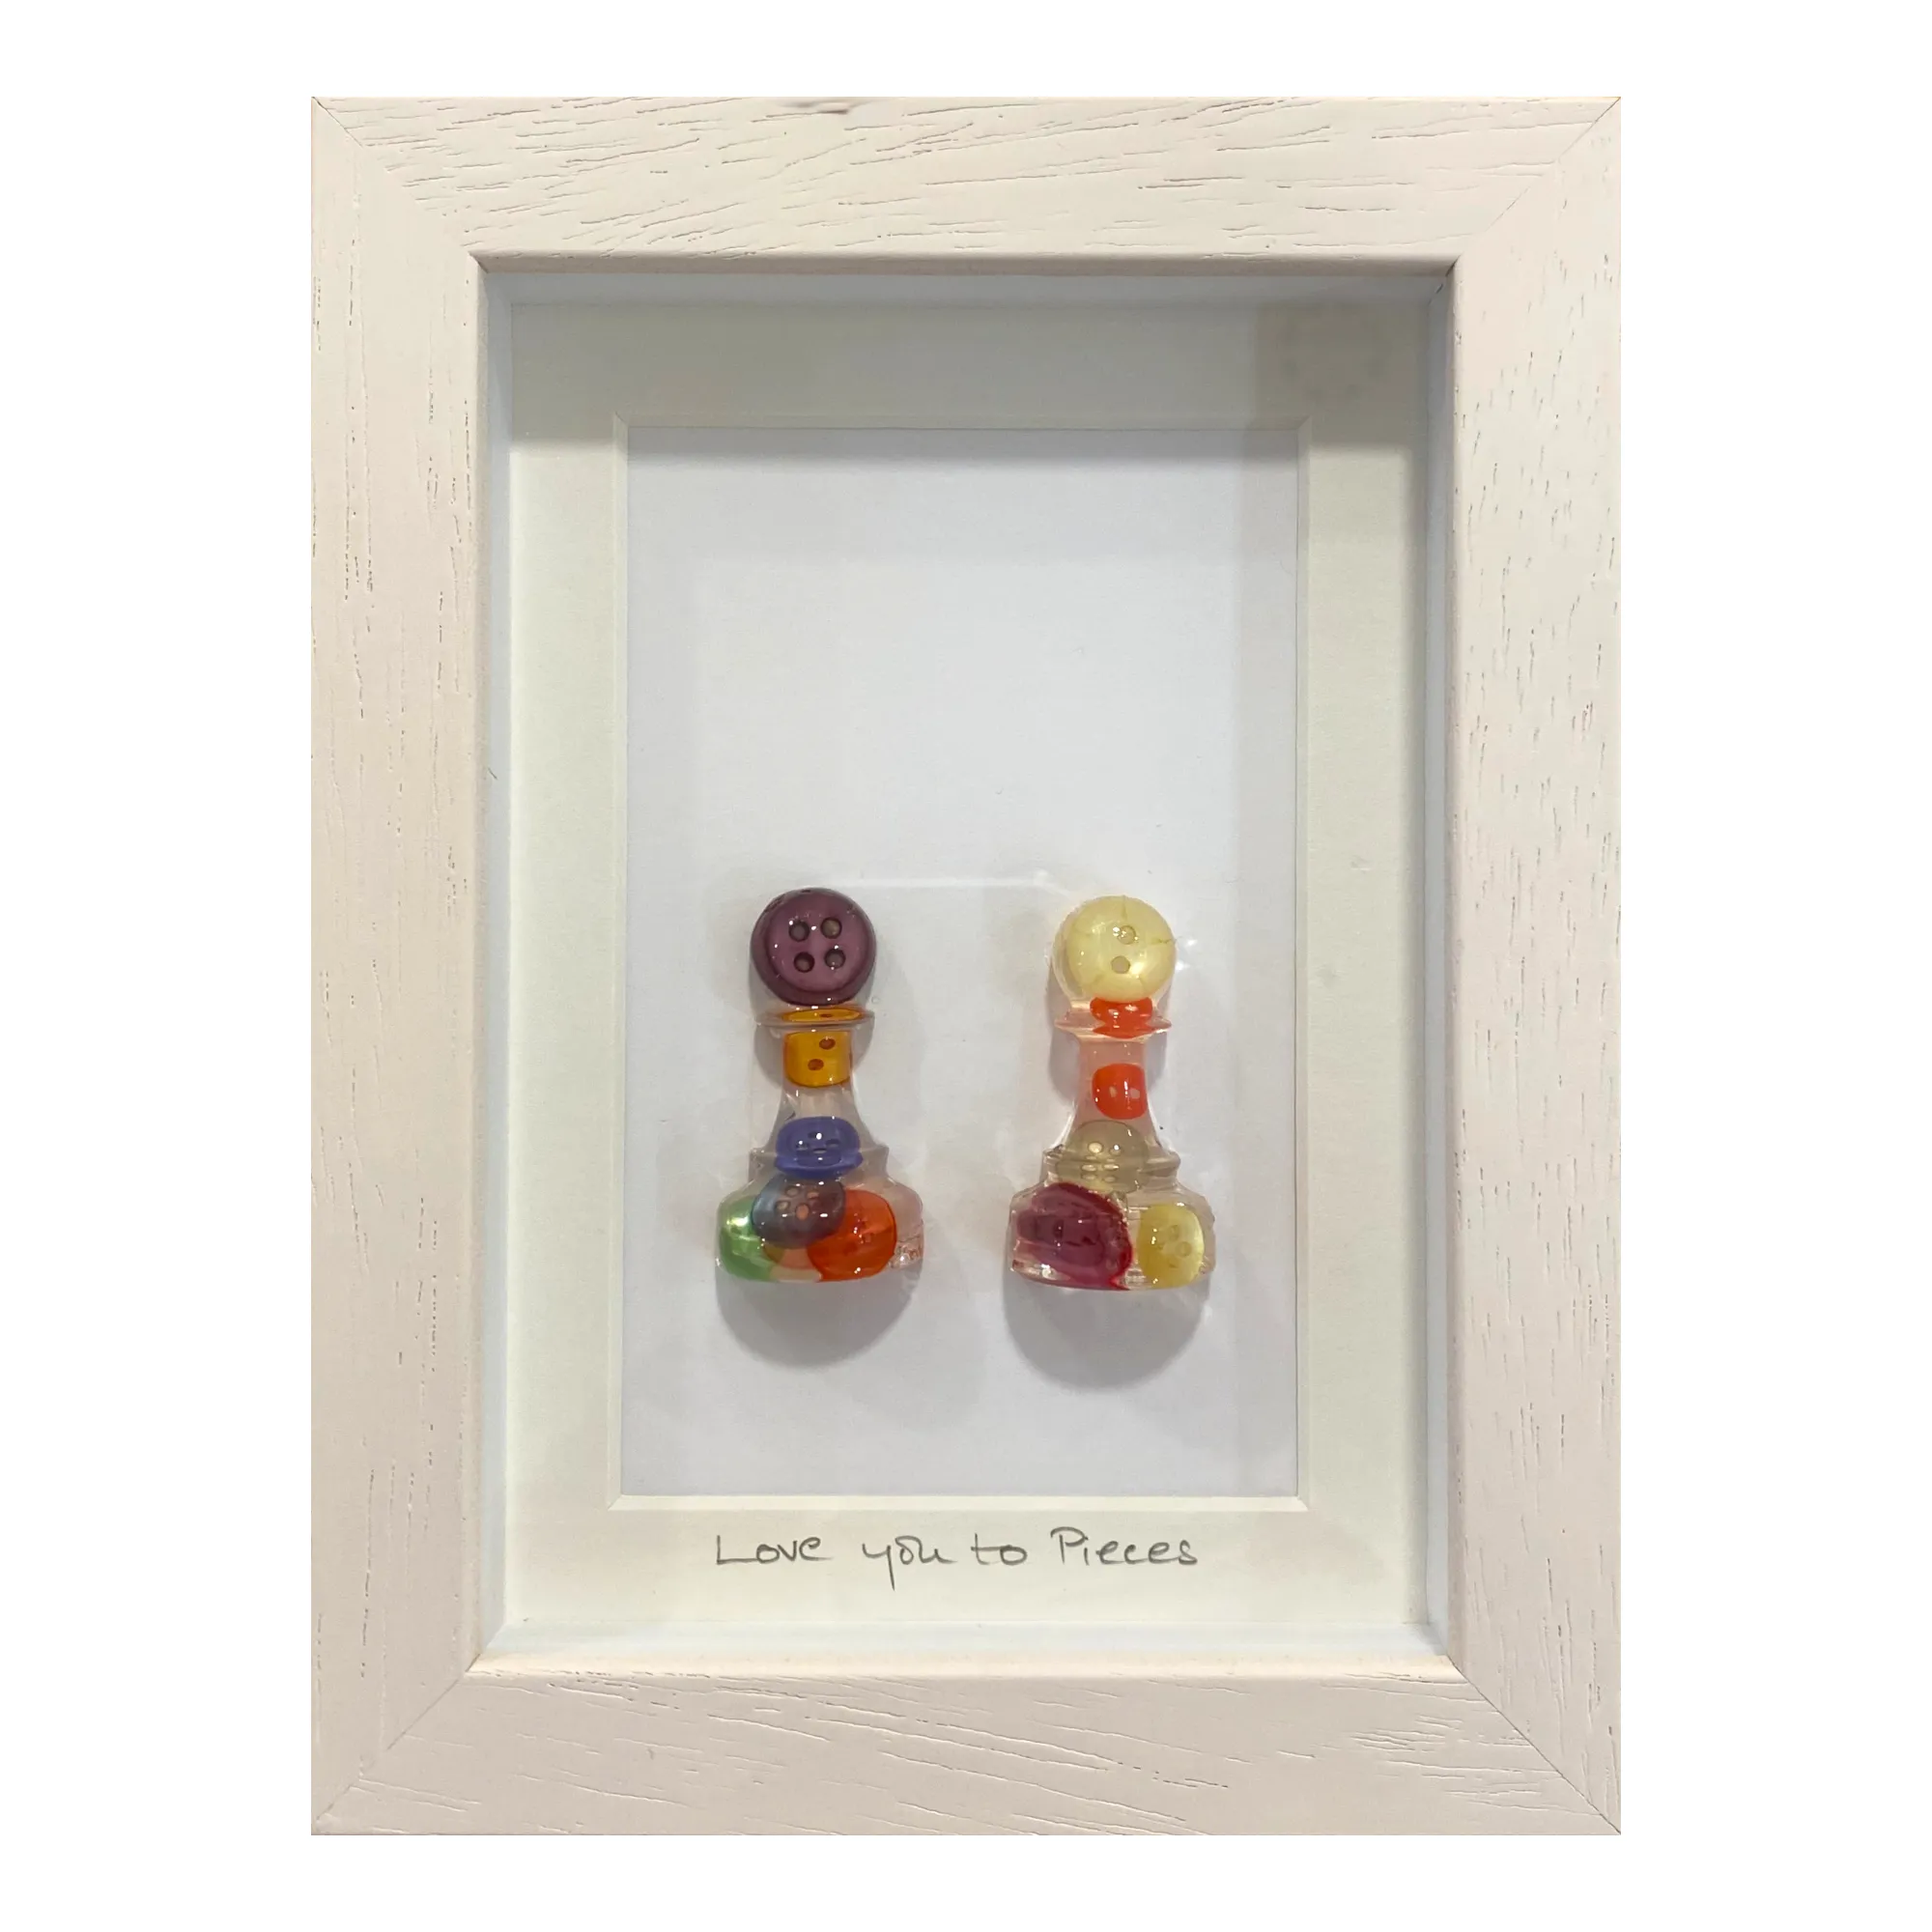 Love you to pieces | Button Studio